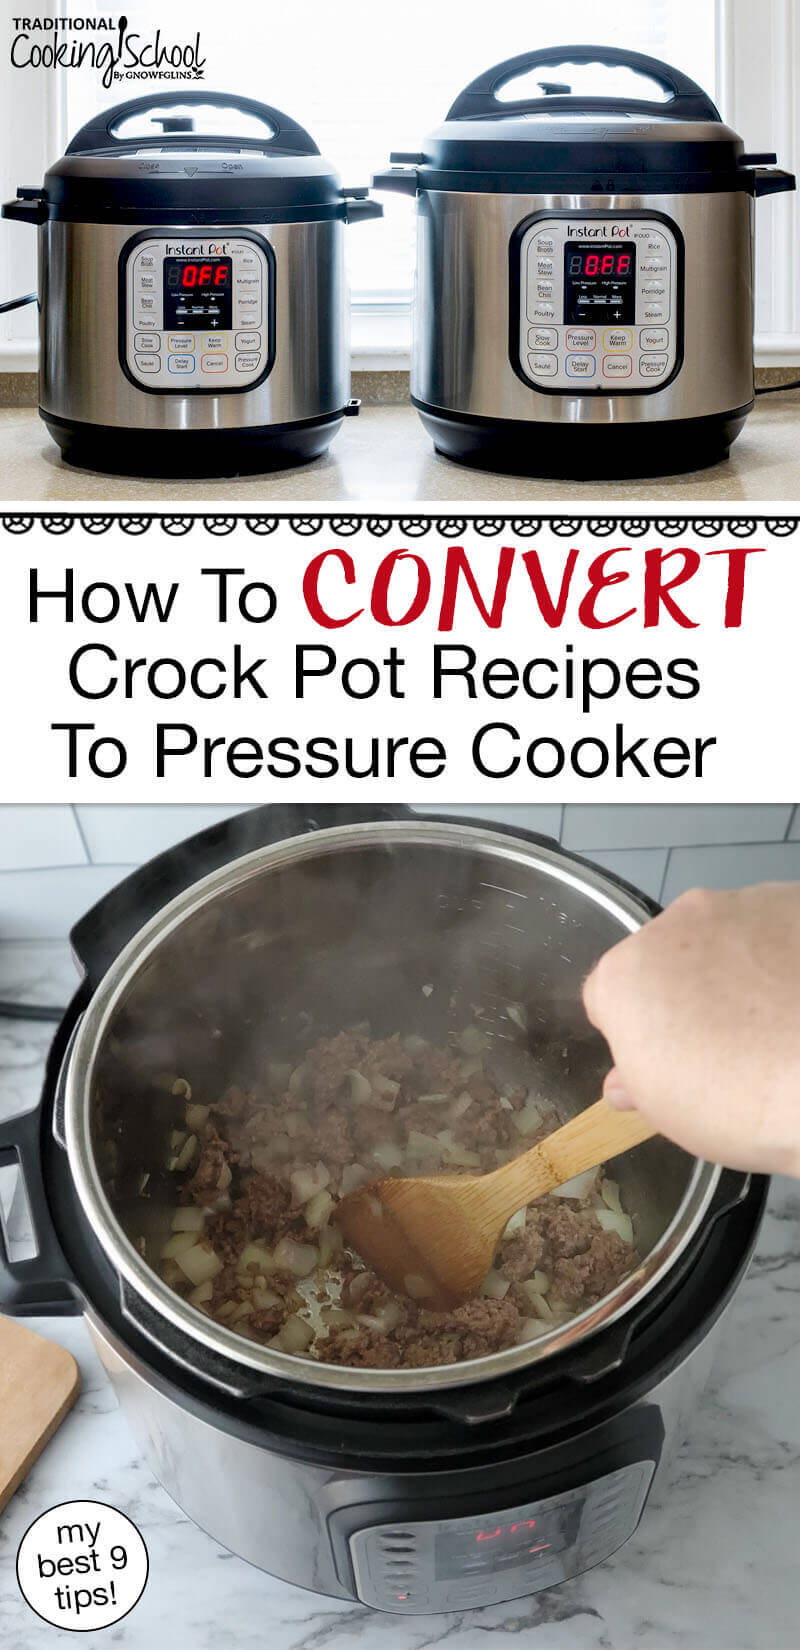 Photo collage of two Instant Pots on a countertop, and browning beef in an Instant Pot set to the "Saute" function. Text overlay says: "How To Convert Crock Pot Recipes To Pressure Cooker (my best 9 tips)"